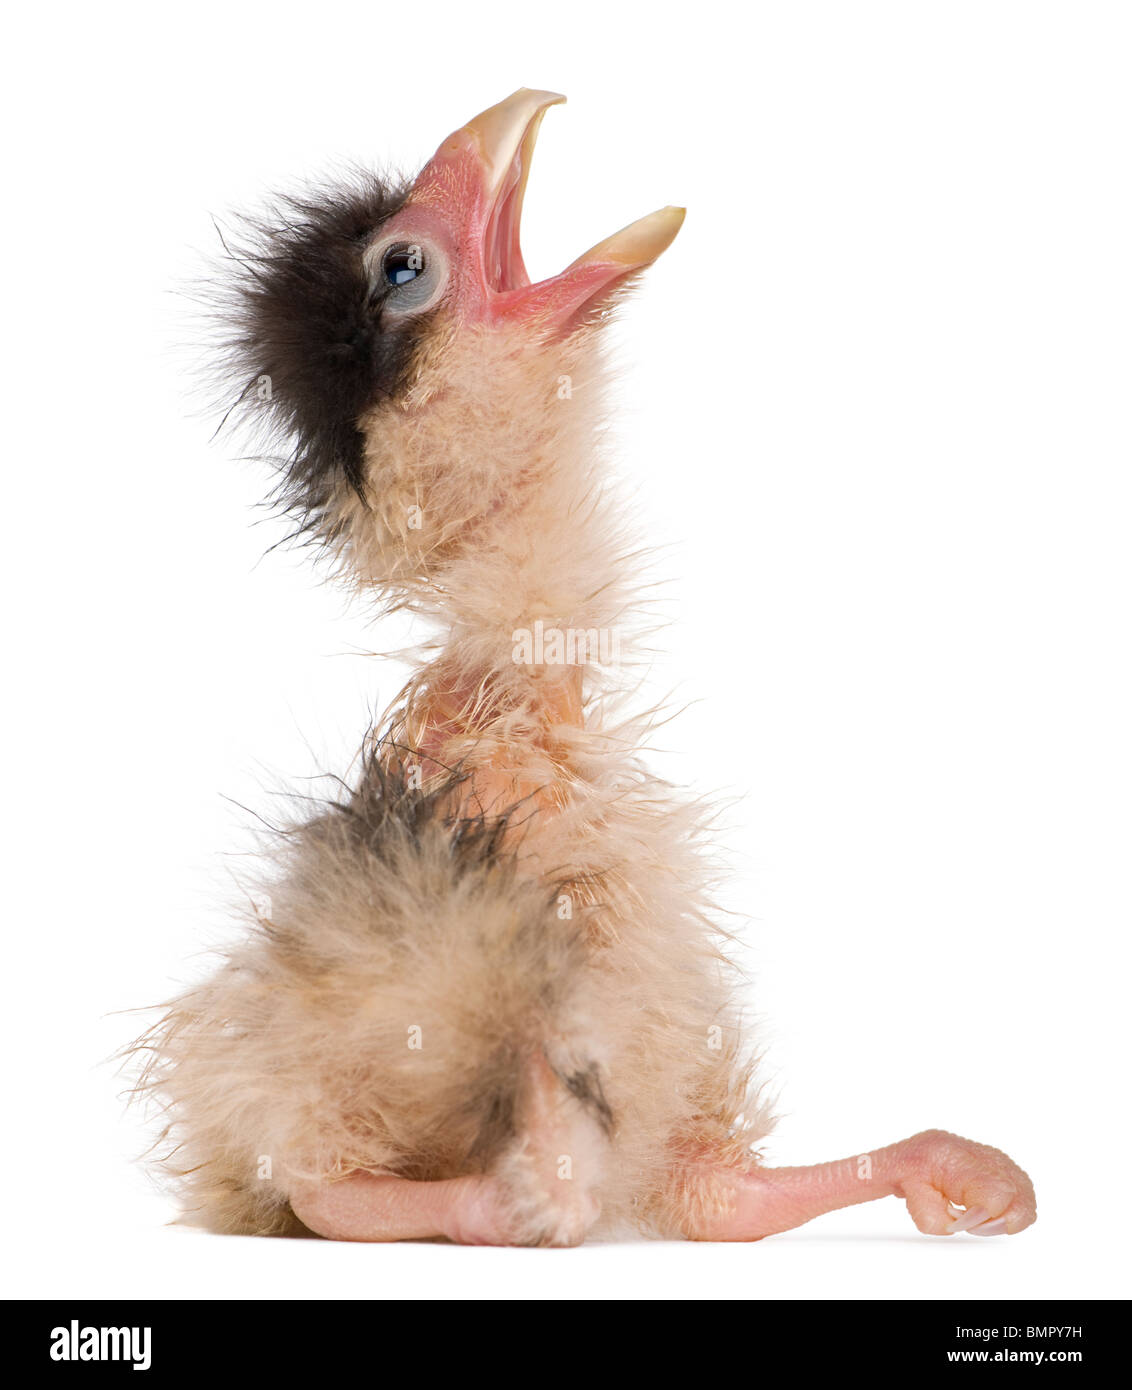 Southern Caracaras chick, 12 hours old, sitting in front of white background Stock Photo